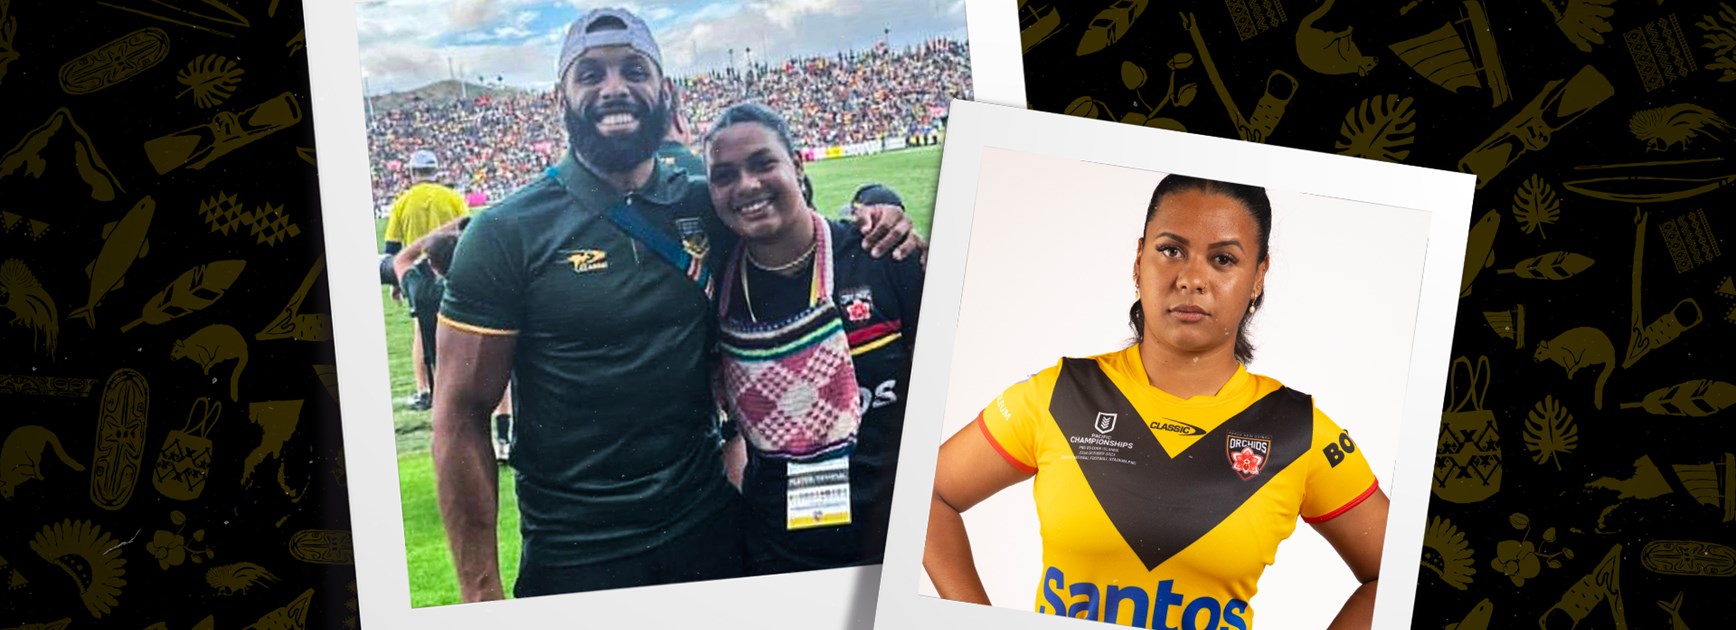 The new Foxx in town: Addo-Carr's cousin to carry name on international stage